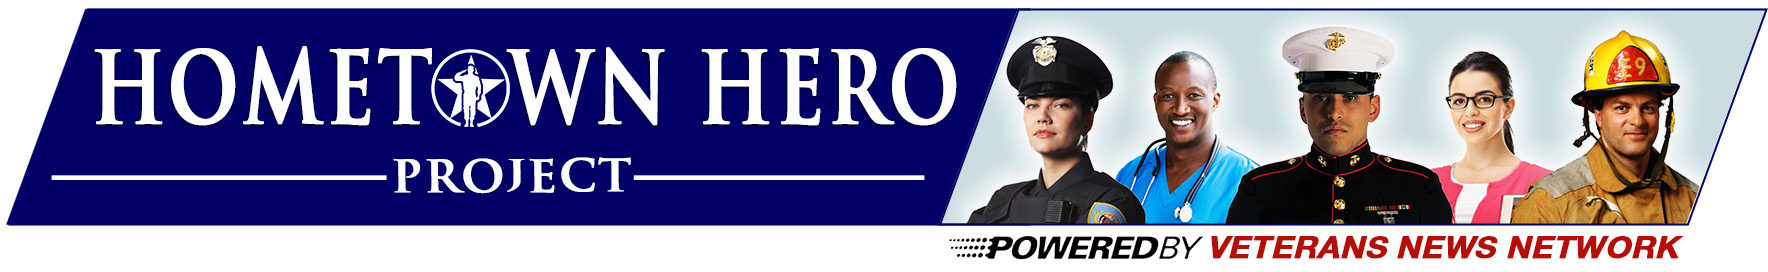 Hometown Hero Project | Preferred Automotive Specialists,Inc.